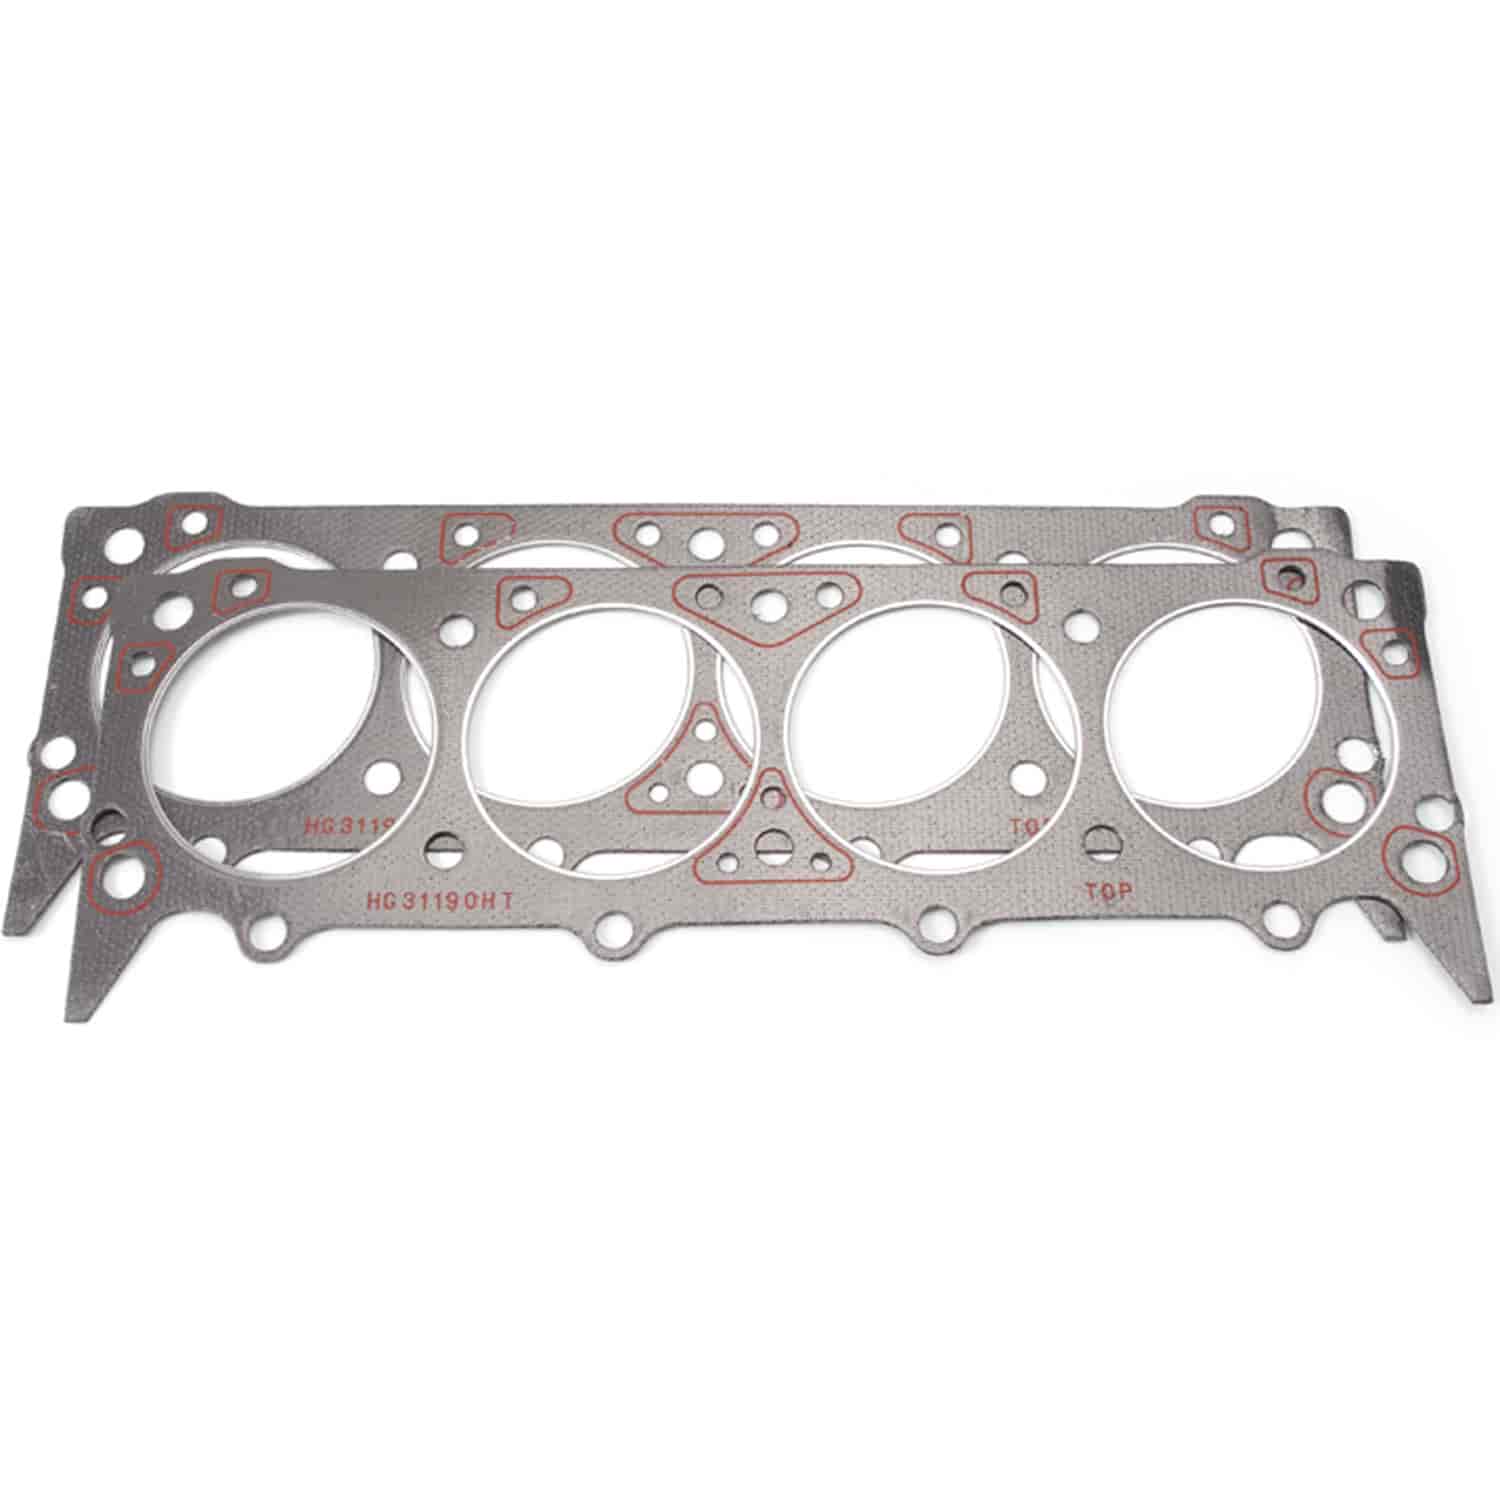 Head Gaskets for AMC 290-401